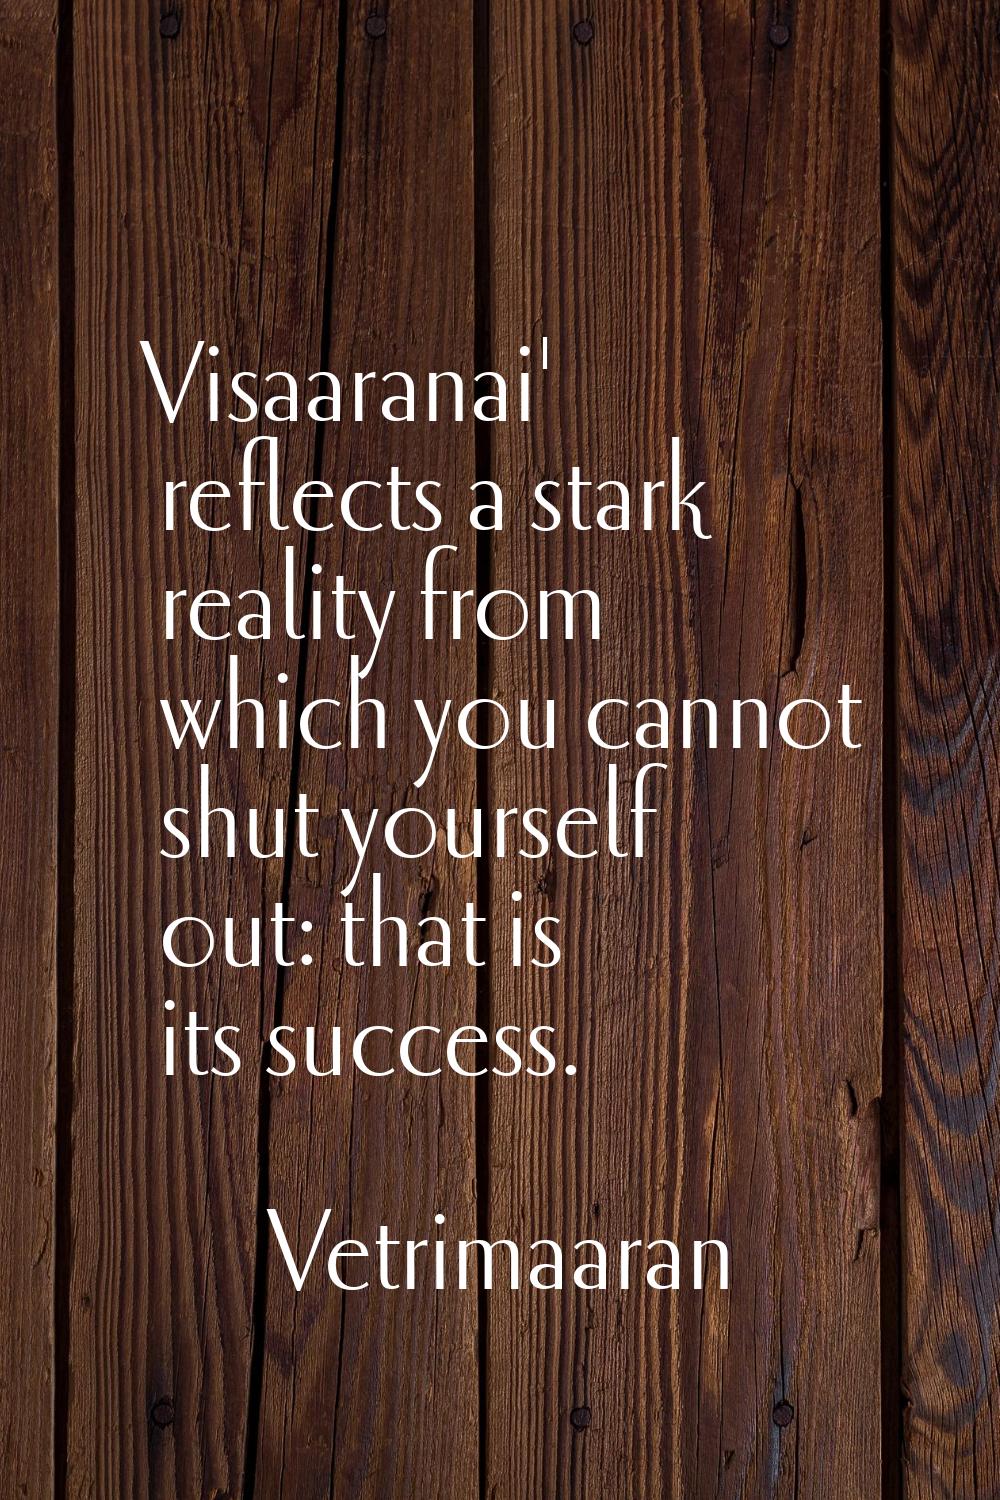 Visaaranai' reflects a stark reality from which you cannot shut yourself out: that is its success.